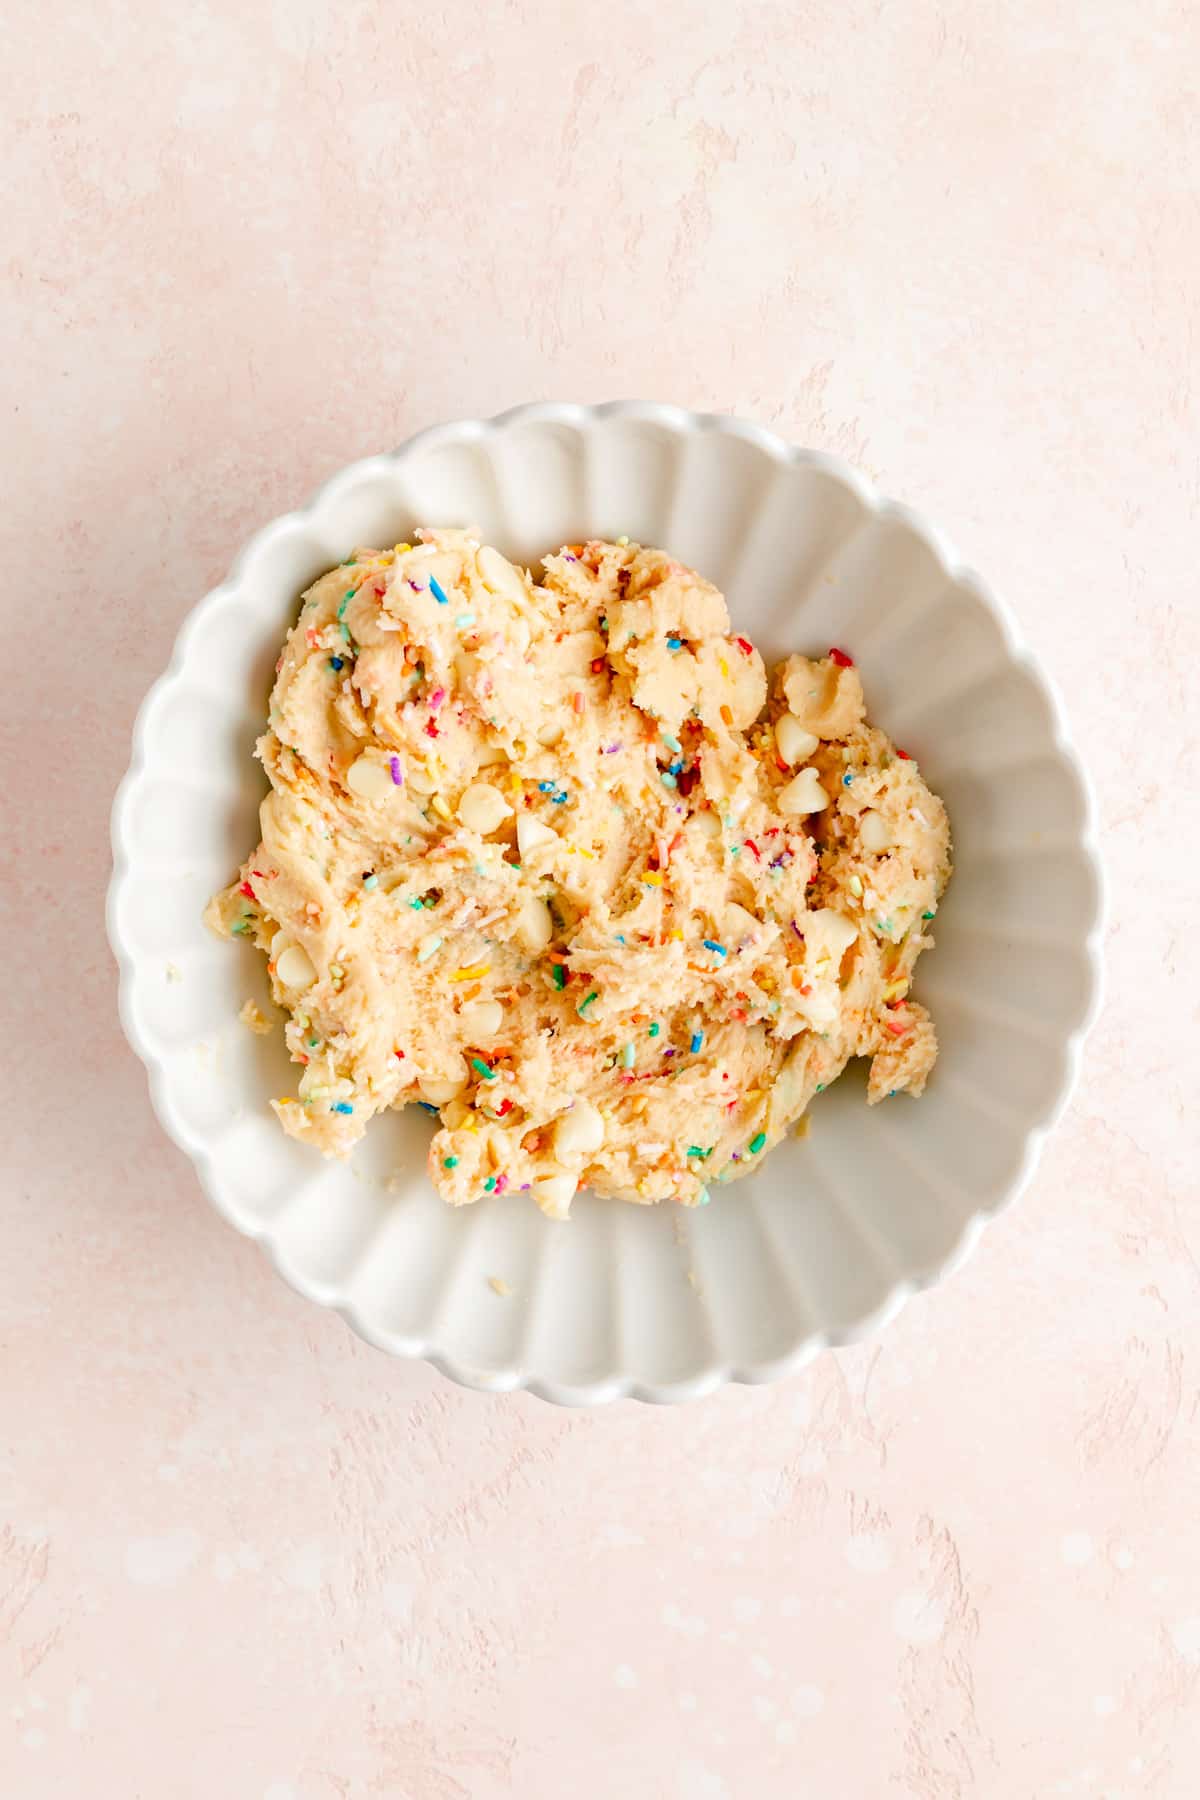 White scalloped mixing bowl filled with finished edible funfetti sugar cookie dough.